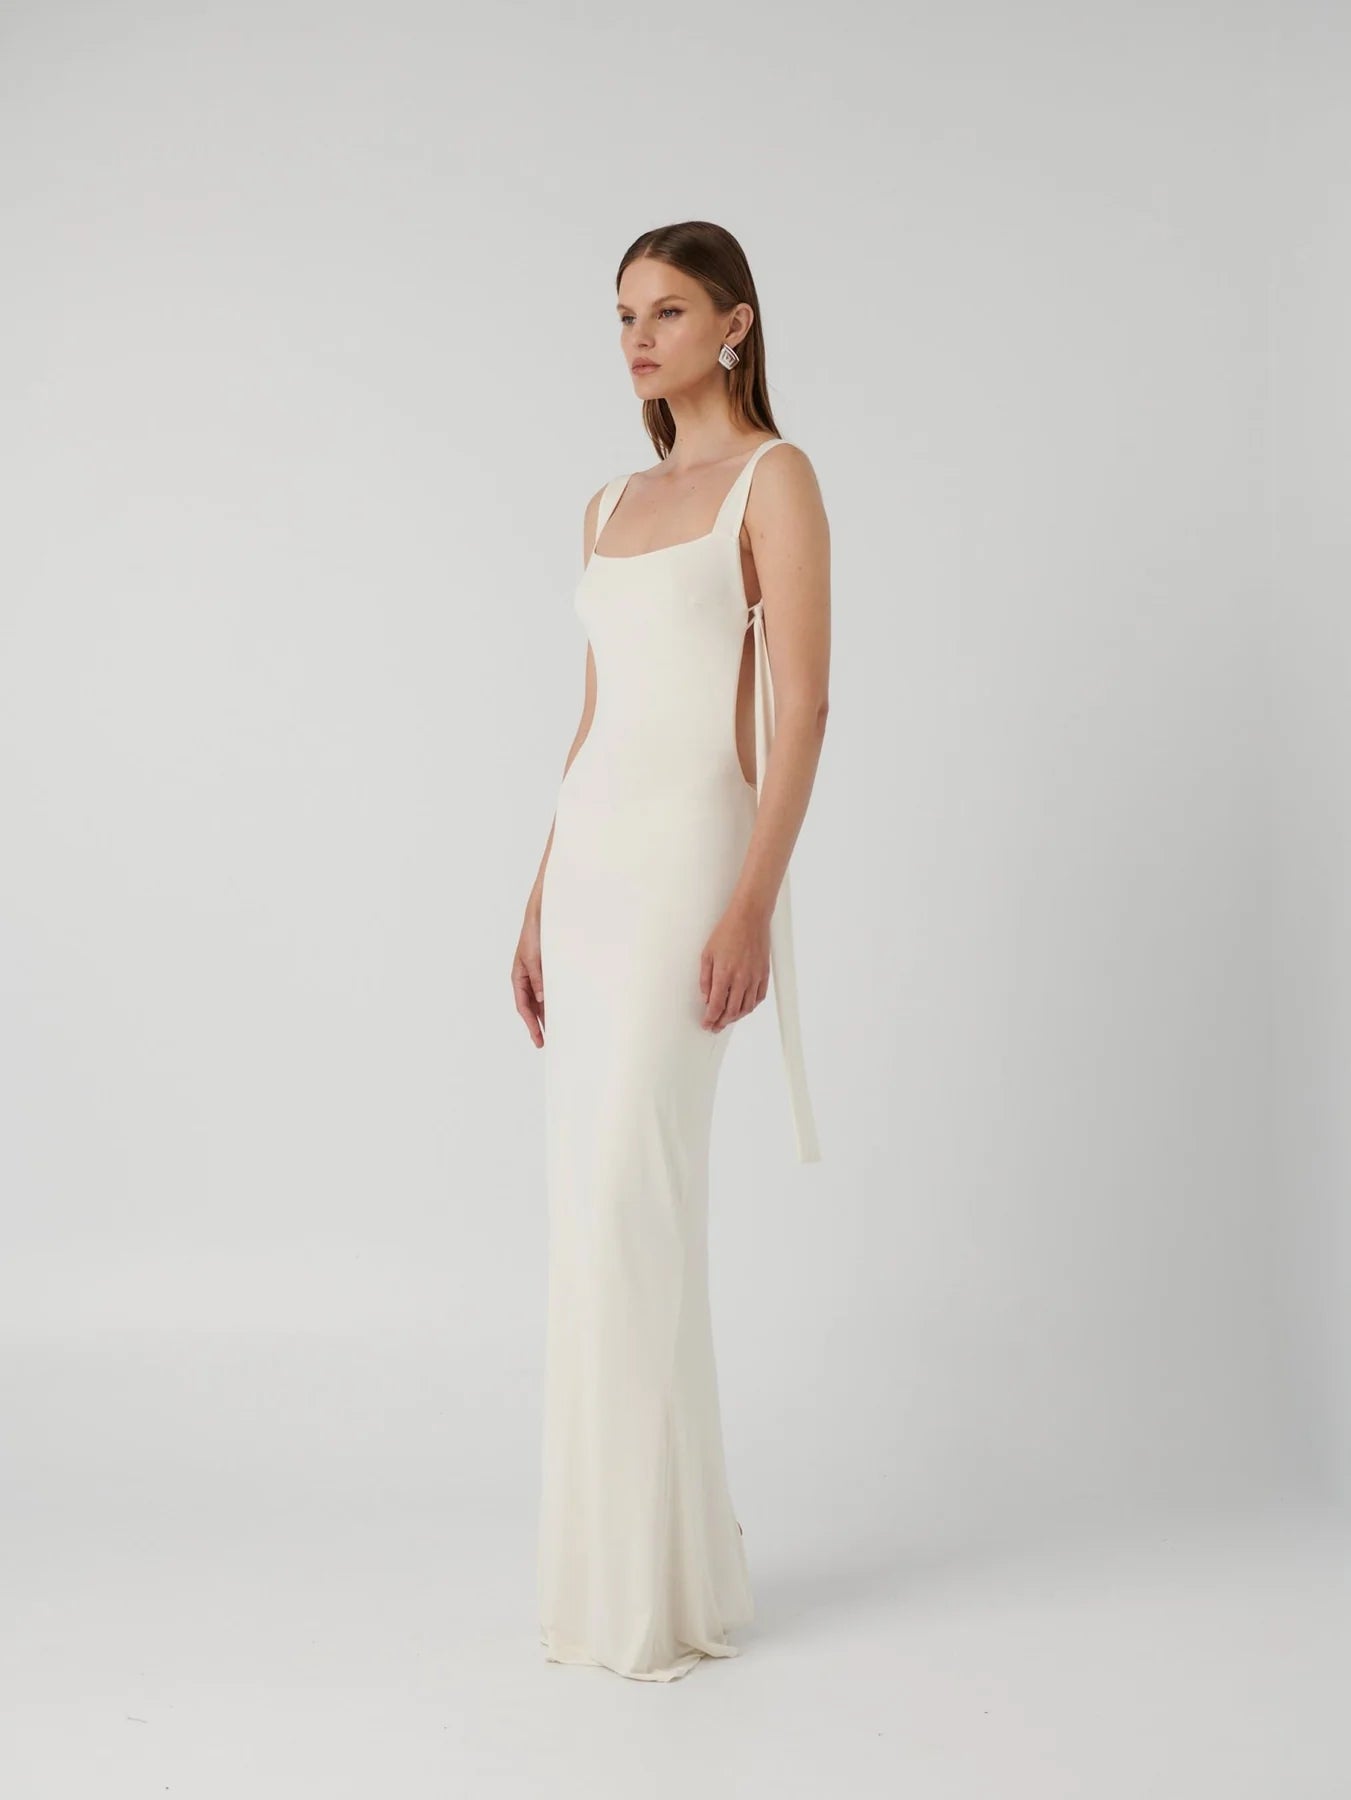 Hire EFFIE KATS Helena Gown in Ivory